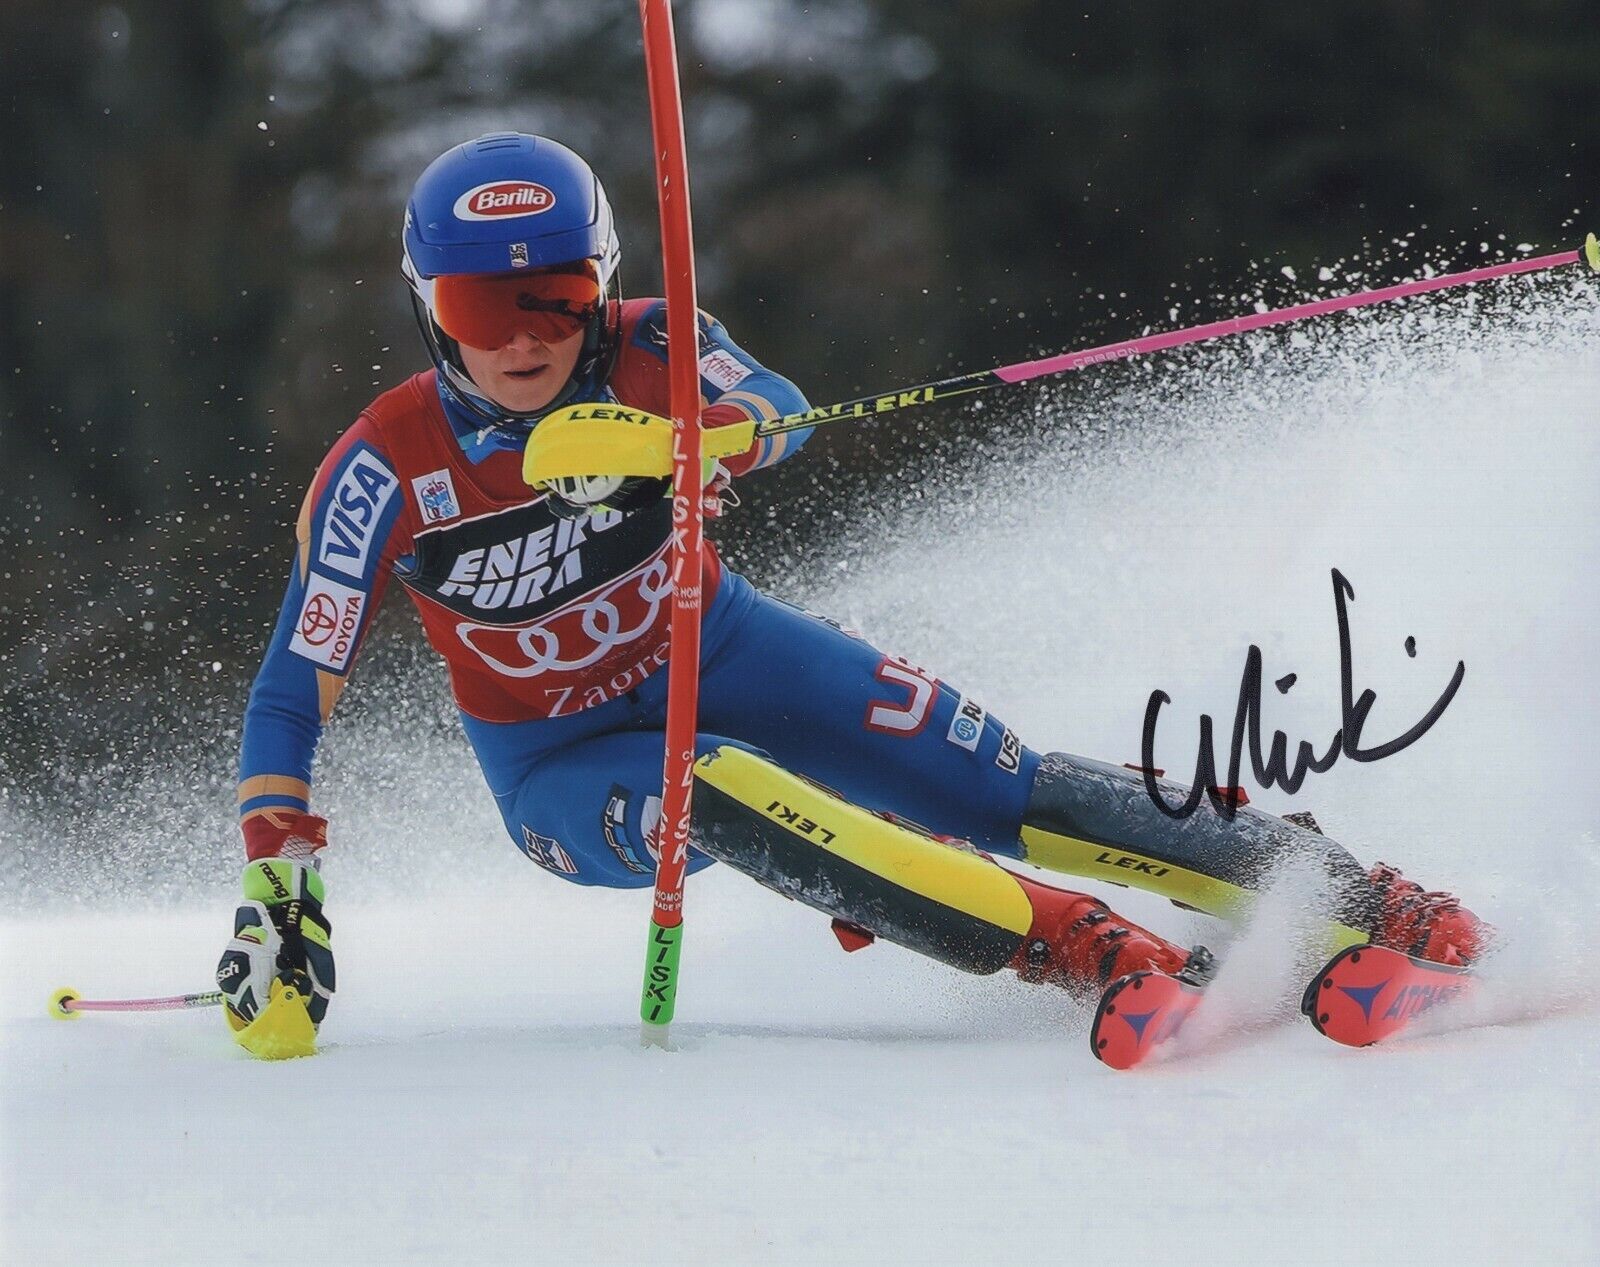 MIKAELA SHIFFRIN SIGNED AUTOGRAPH OLYMPICS DOWNHILL SKIING 8X10 Photo Poster painting #3